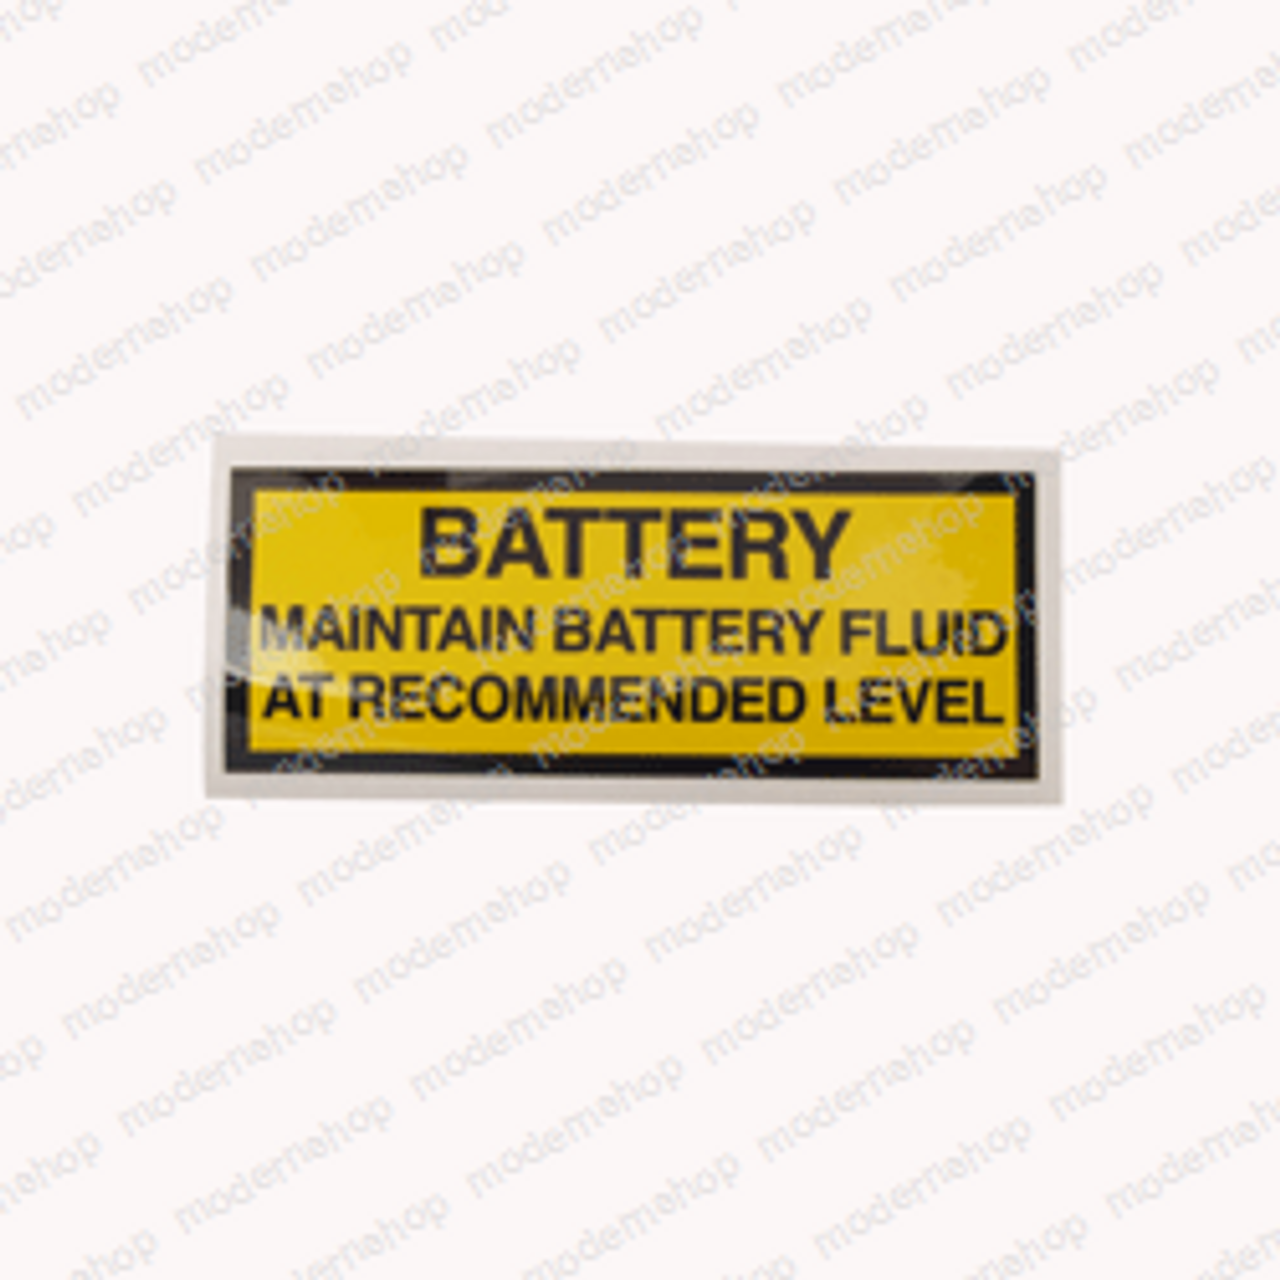 005221-000: Upright DECAL - BATTERY MAINTAIN